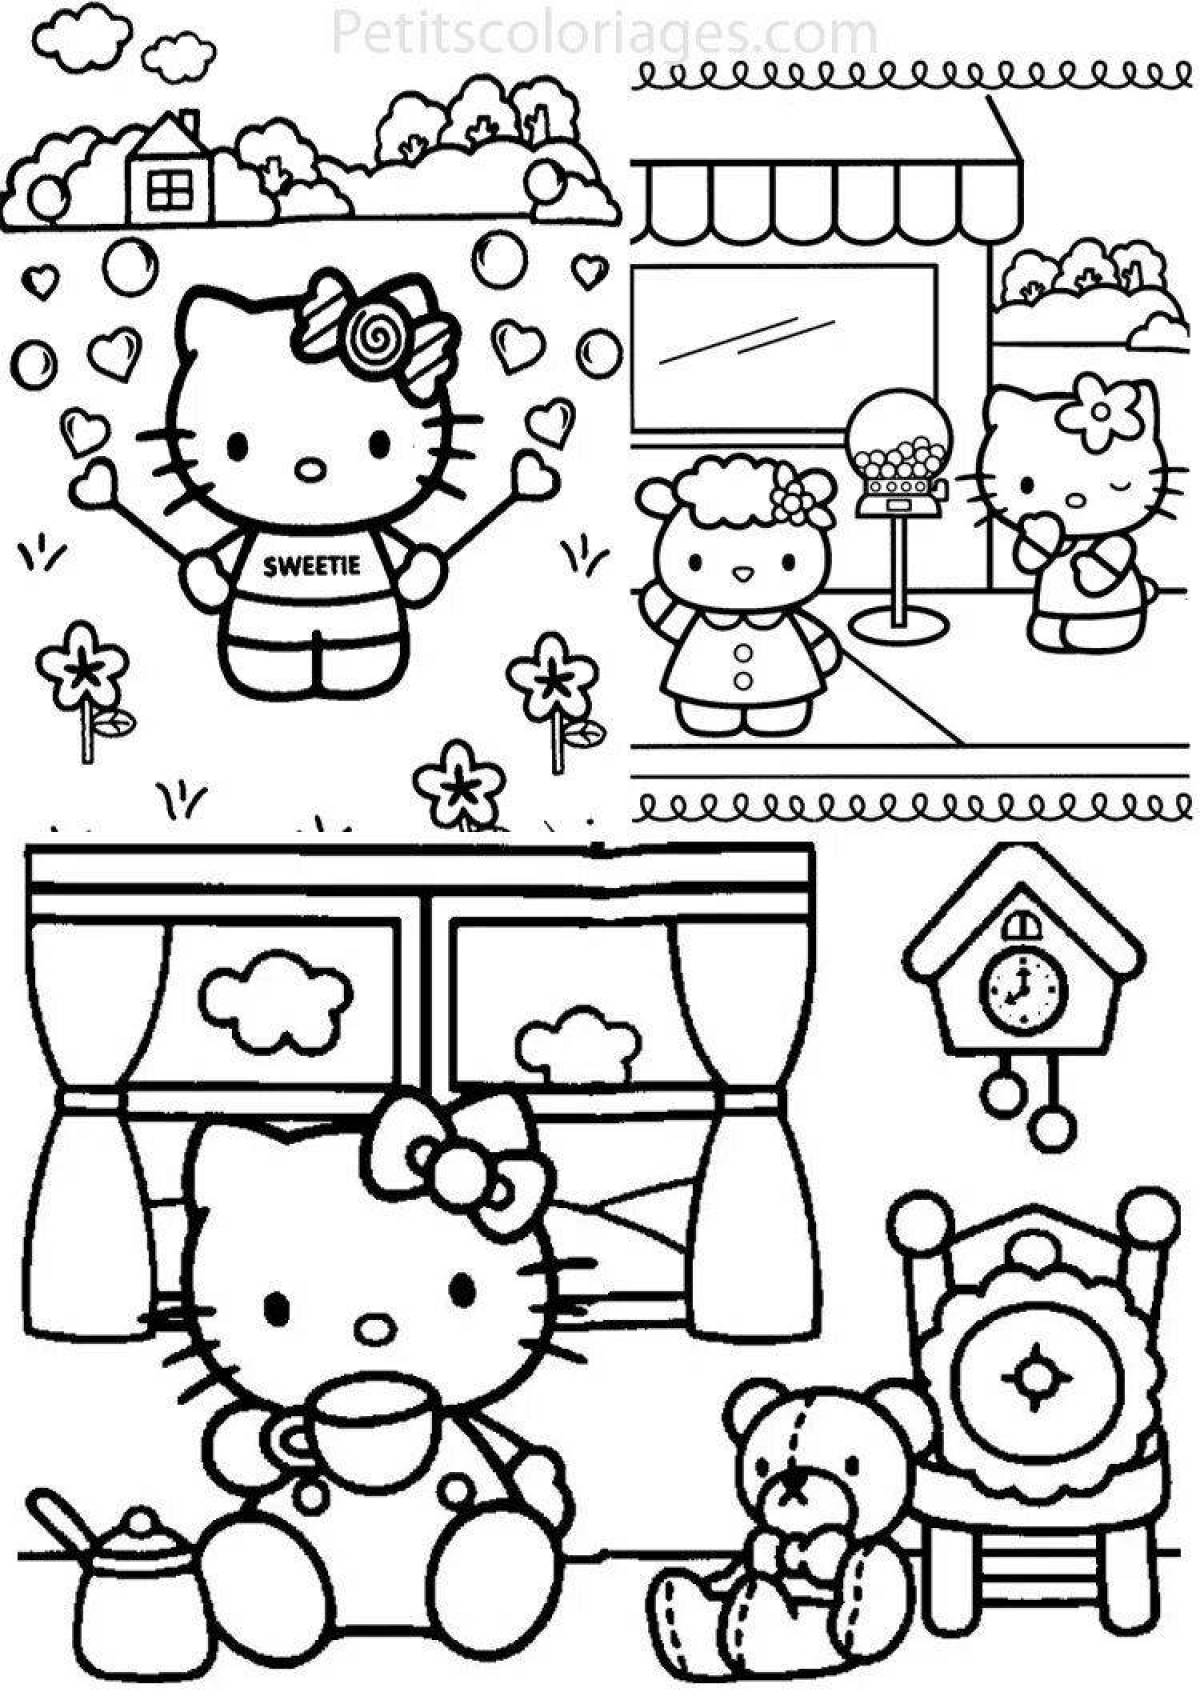 A tasteful coloring hello kitty with clothes